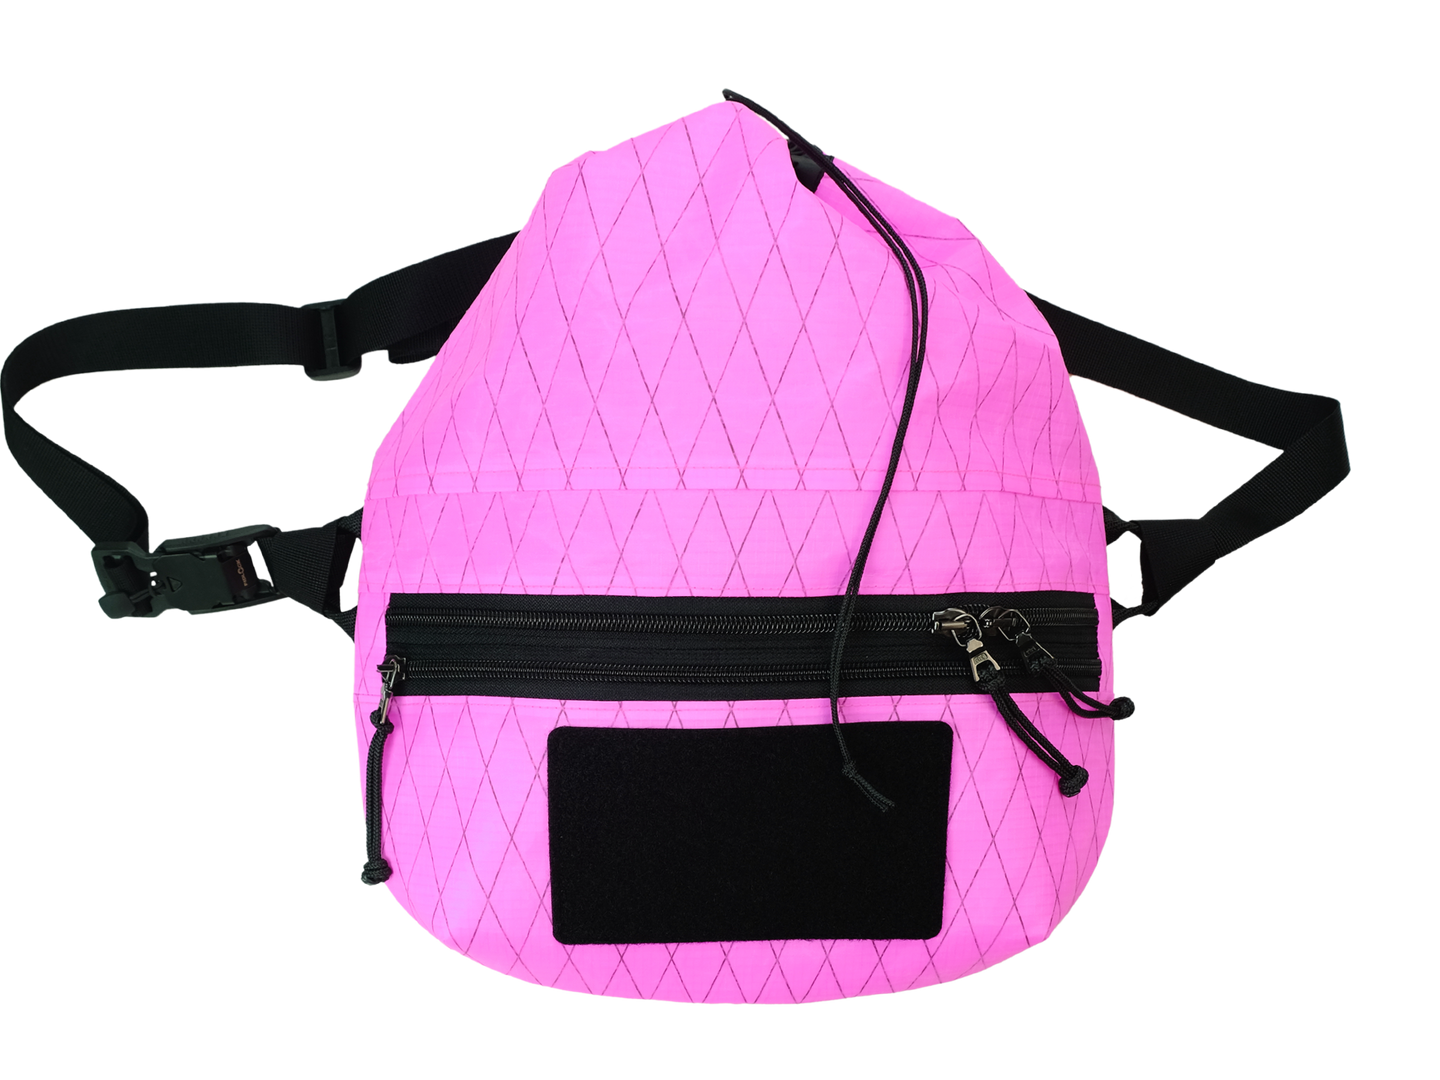 X-Pac® Pouch 4.0 Pink (shipping in May)